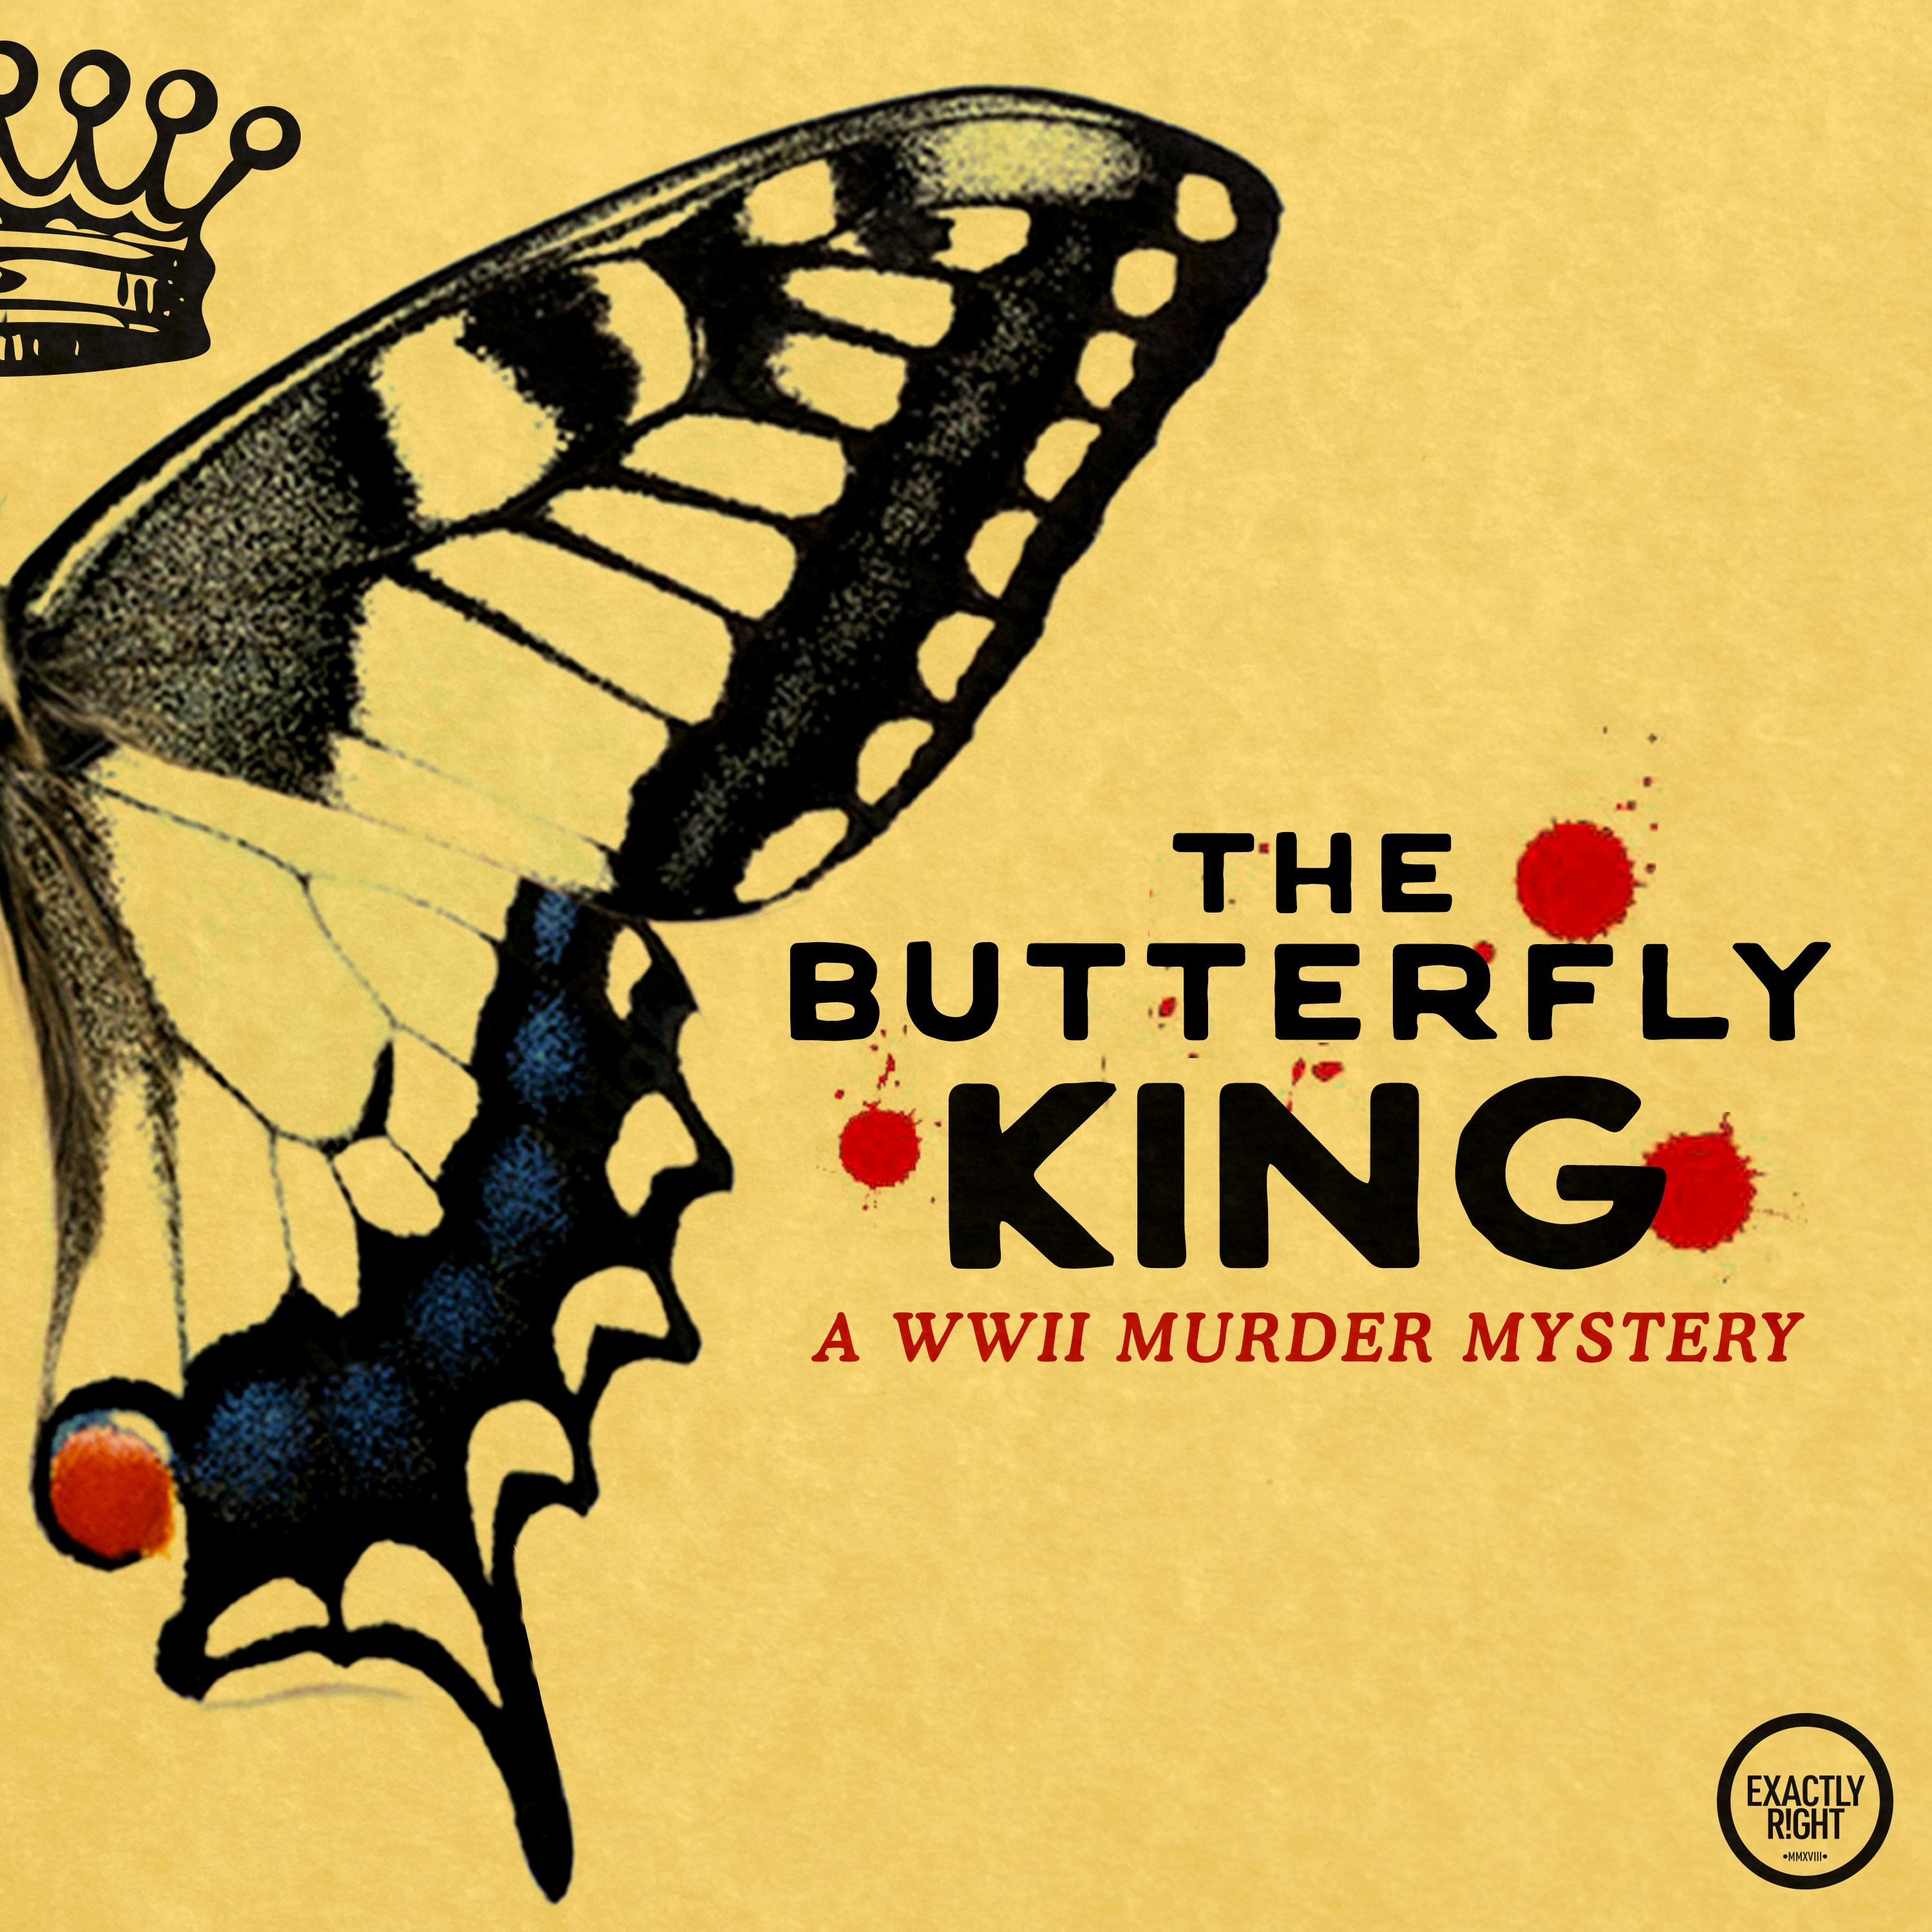 Introducing: The Butterfly King